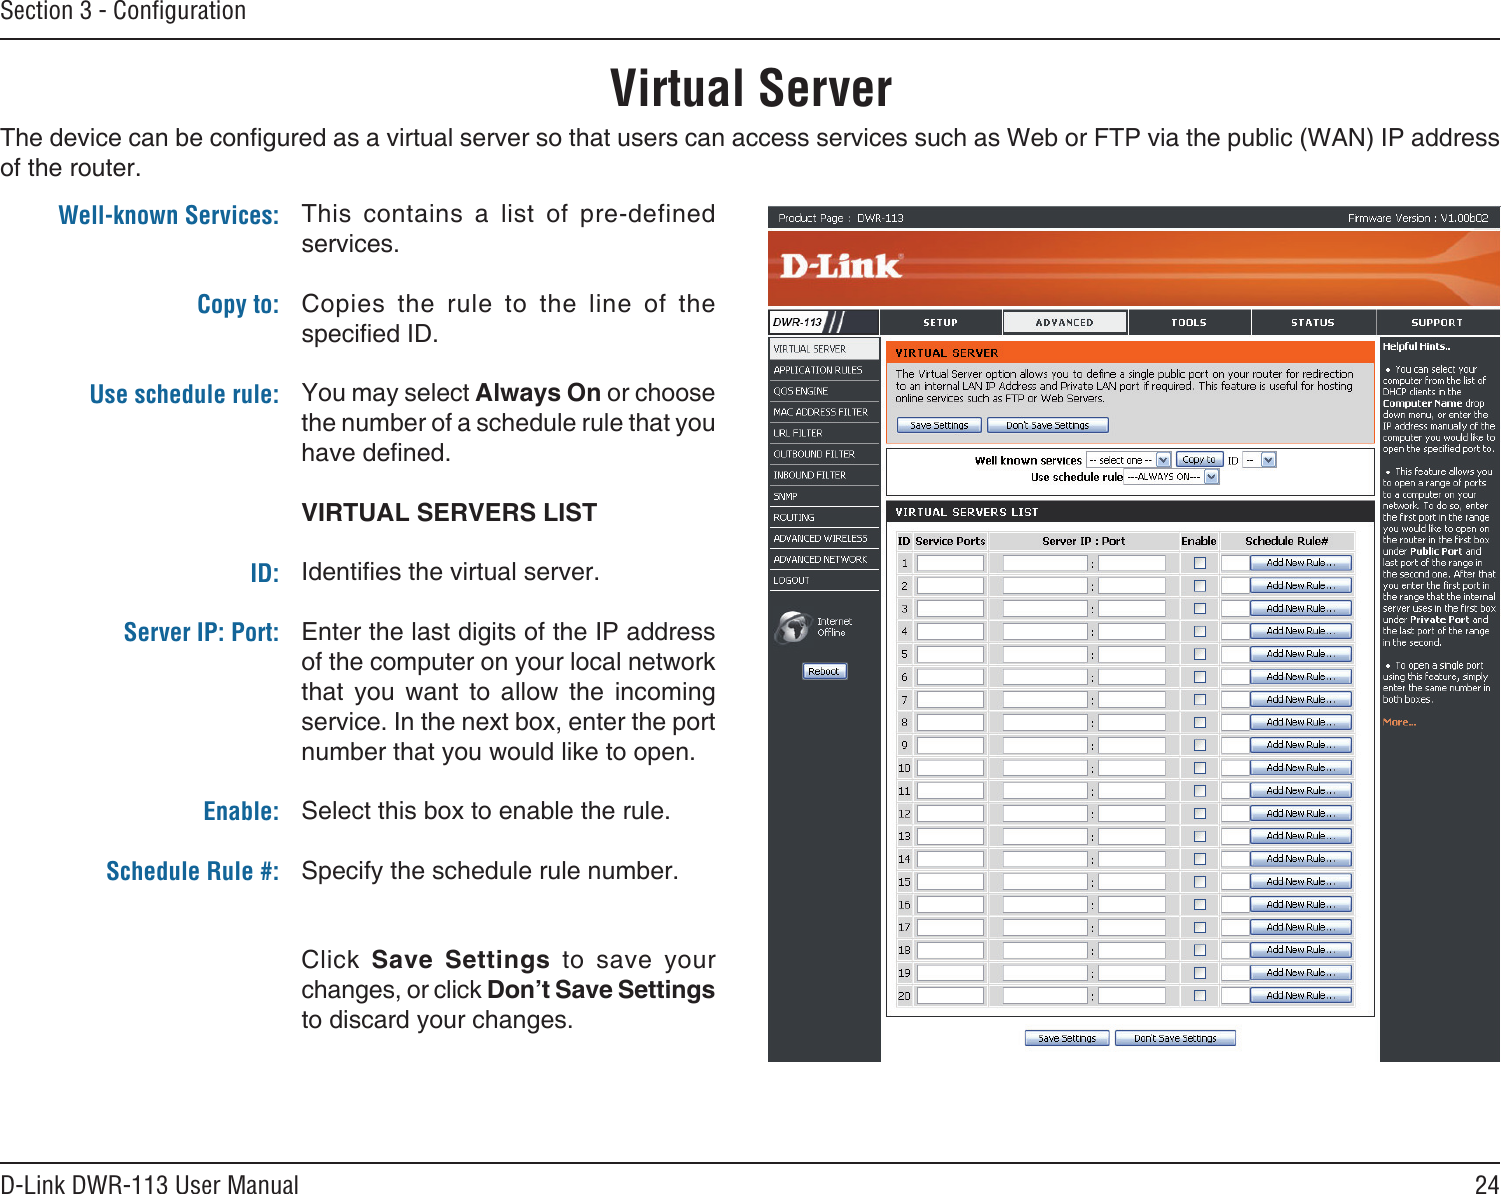 24D-Link DWR-113 User ManualSection 3 - ConﬁgurationVirtual ServerThe device can be congured as a virtual server so that users can access services such as Web or FTP via the public (WAN) IP address of the router. This  contains  a  list  of  pre-defined services.Copies  the  rule  to  the  line  of  the specied ID.You may select Always On or choose the number of a schedule rule that you have dened.VIRTUAL SERVERS LISTIdenties the virtual server.Enter the last digits of the IP address of the computer on your local network that  you  want  to  allow  the  incoming service. In the next box, enter the port number that you would like to open.Select this box to enable the rule.Specify the schedule rule number. Click  Save  Settings  to  save  your changes, or click Don’t Save Settings to discard your changes.Well-known Services: Copy to: Use schedule rule:ID:Server IP: Port: Enable:Schedule Rule #: